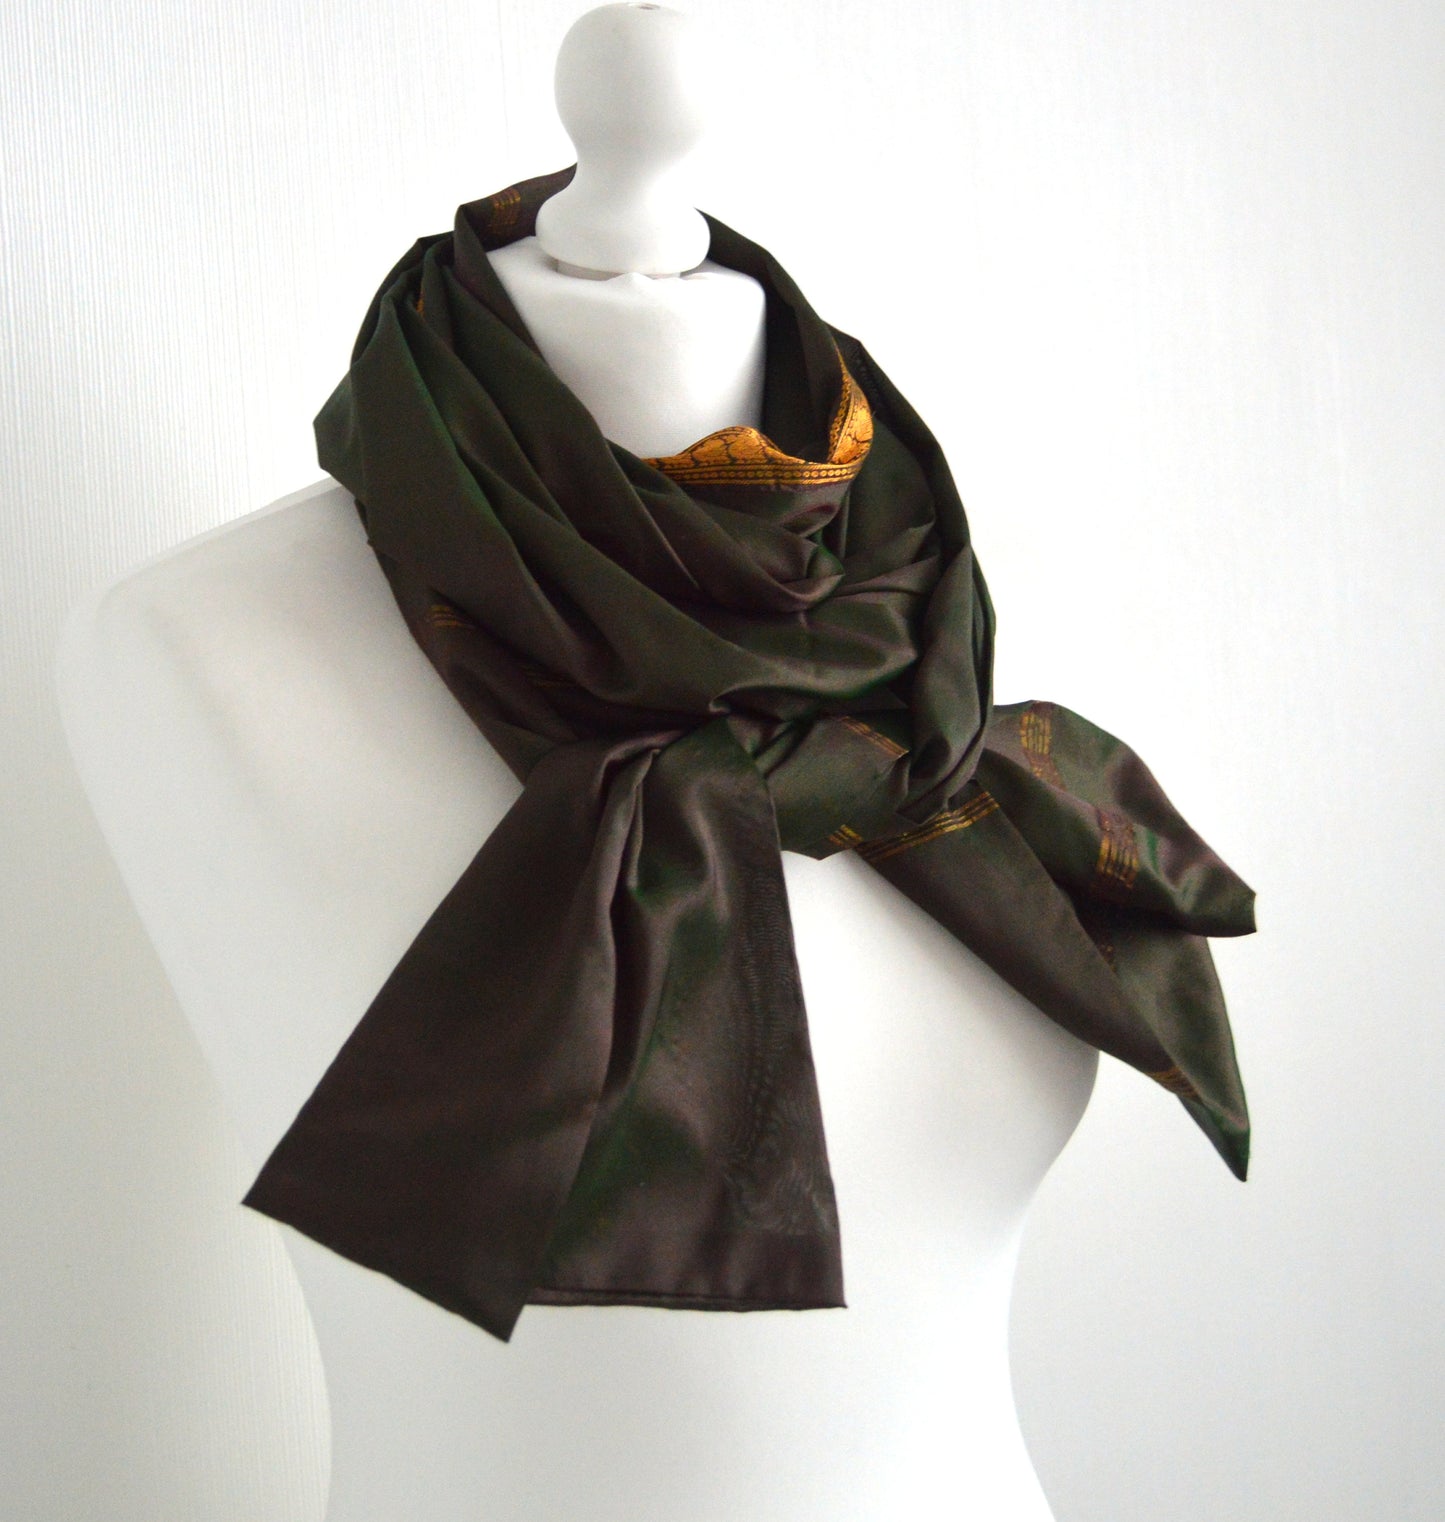 Olive Tonic Upcycled Vintage Sari Silk Scarf - Bohemian Autumn Fall Winter Unisex Womens Scarf - Eco Friendly Christmas Gift for Her or Him